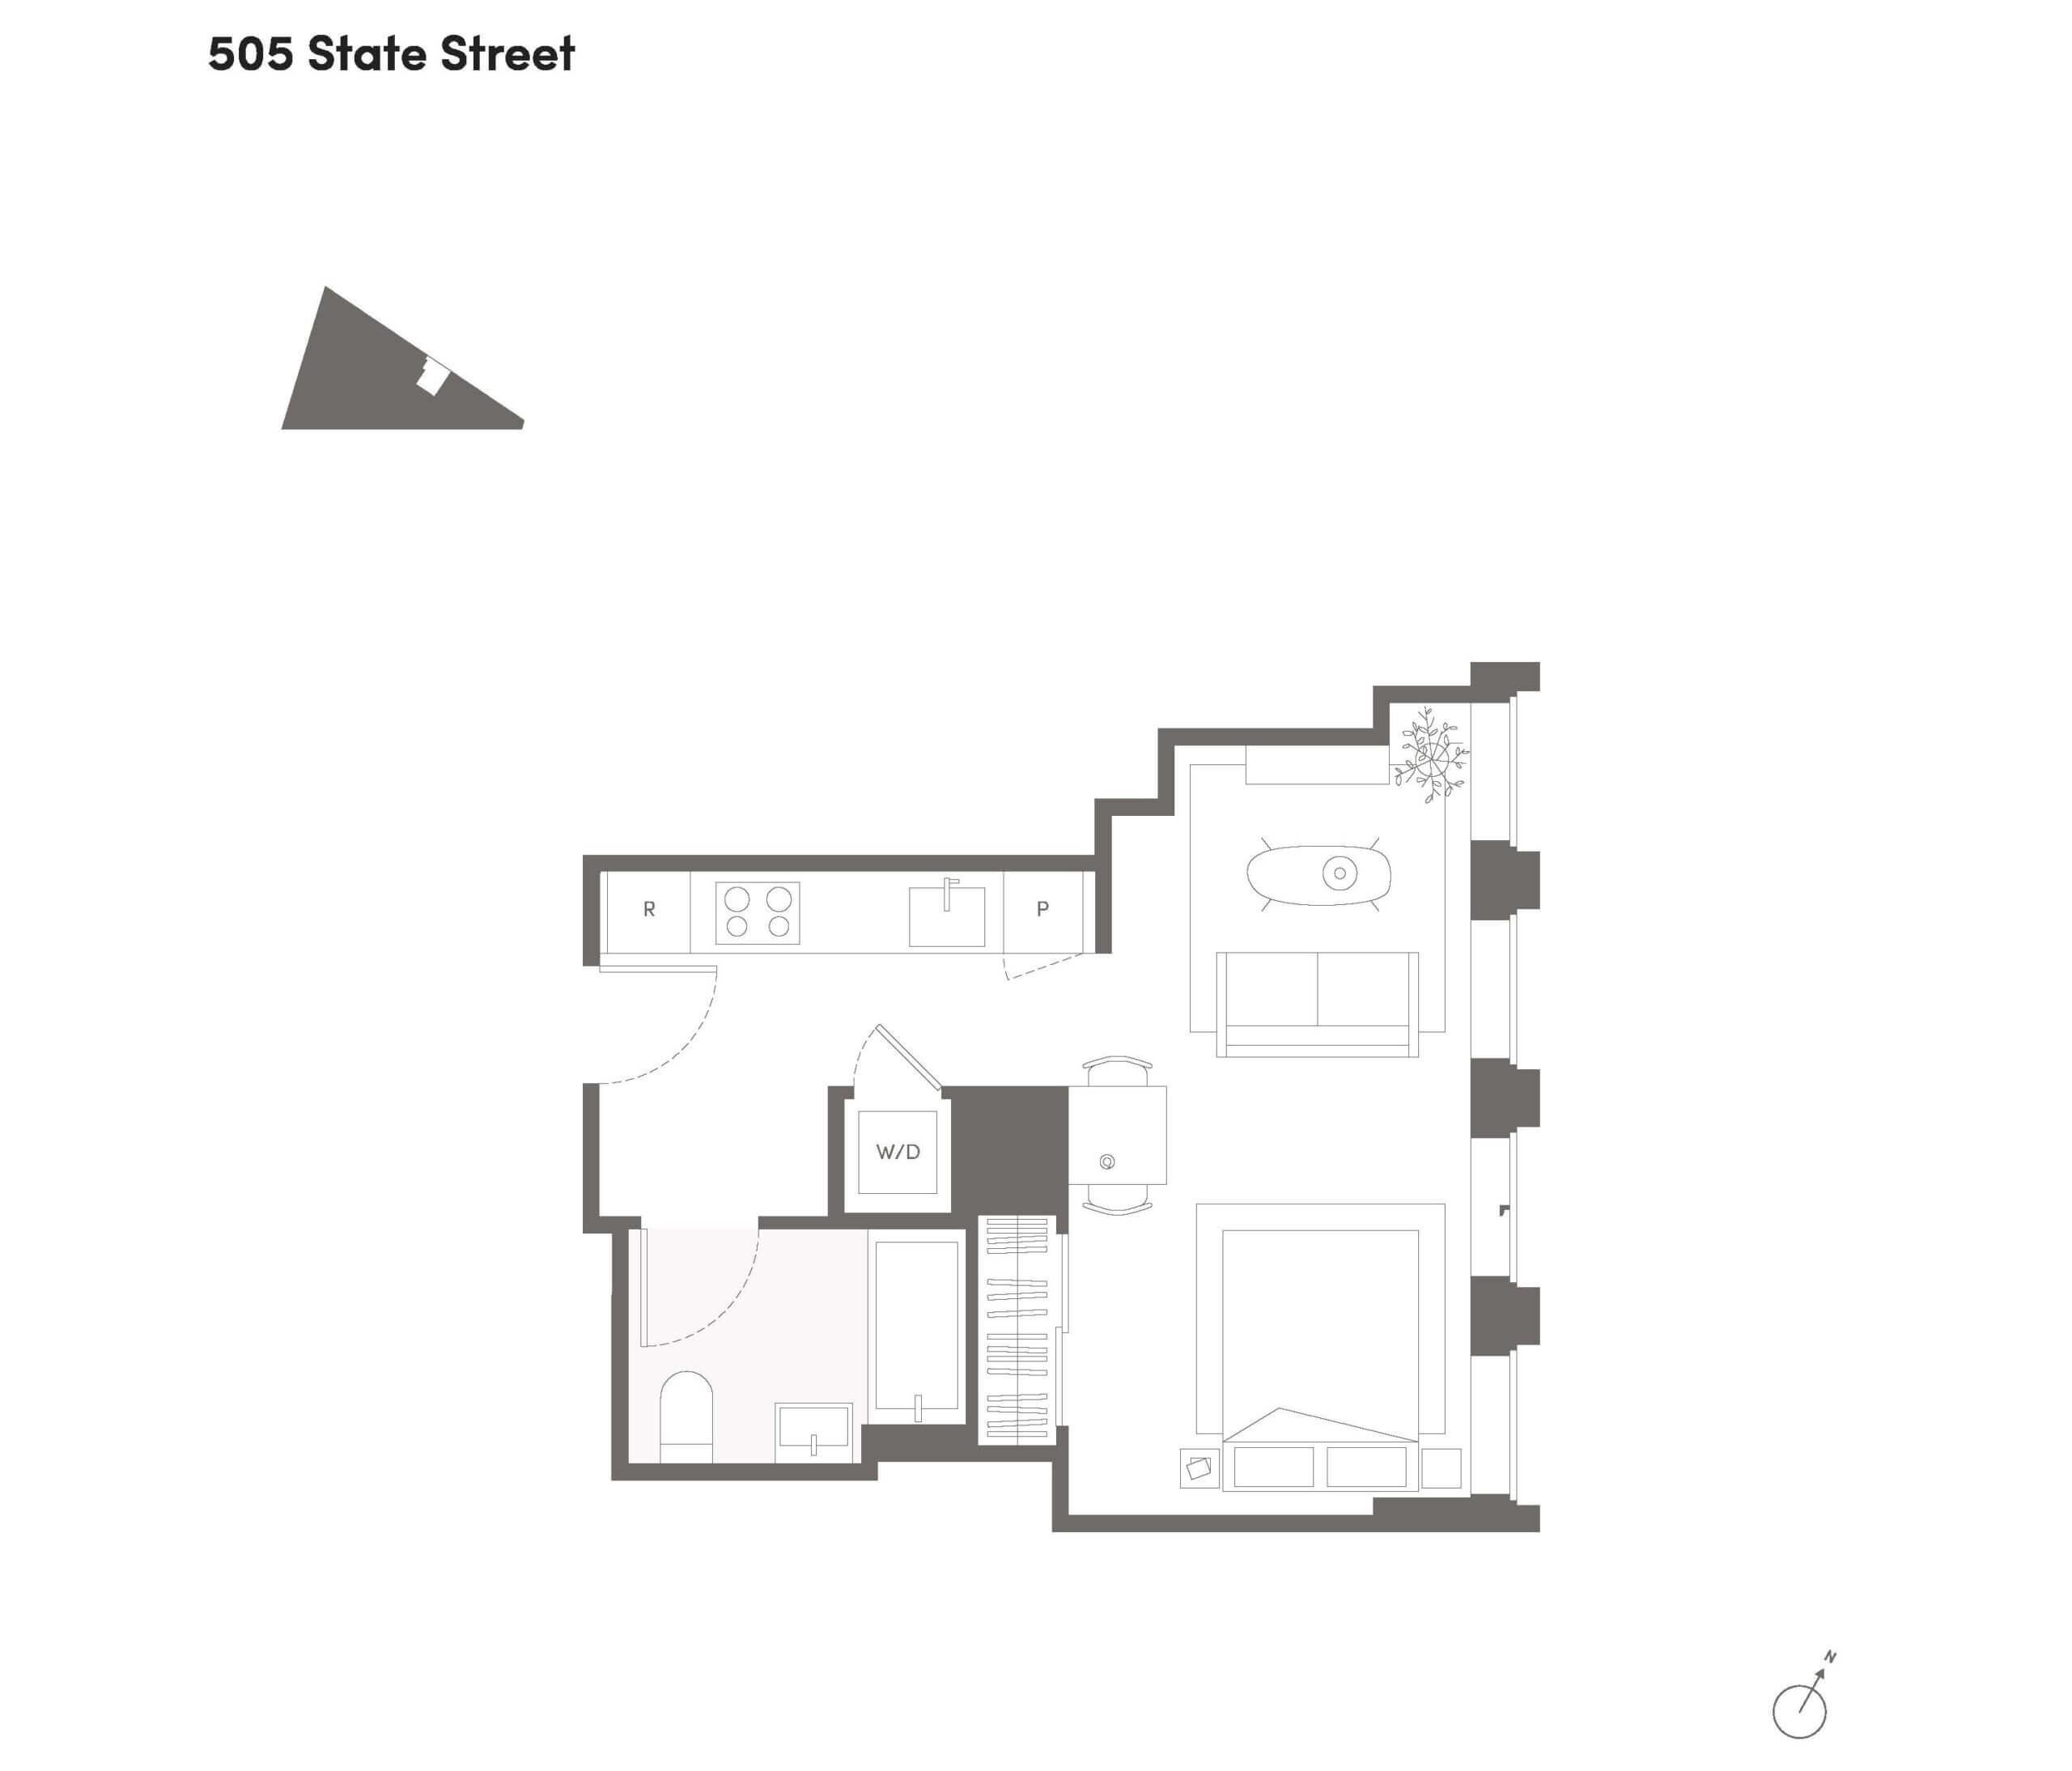 floor plan for a studio unit with windows in living area